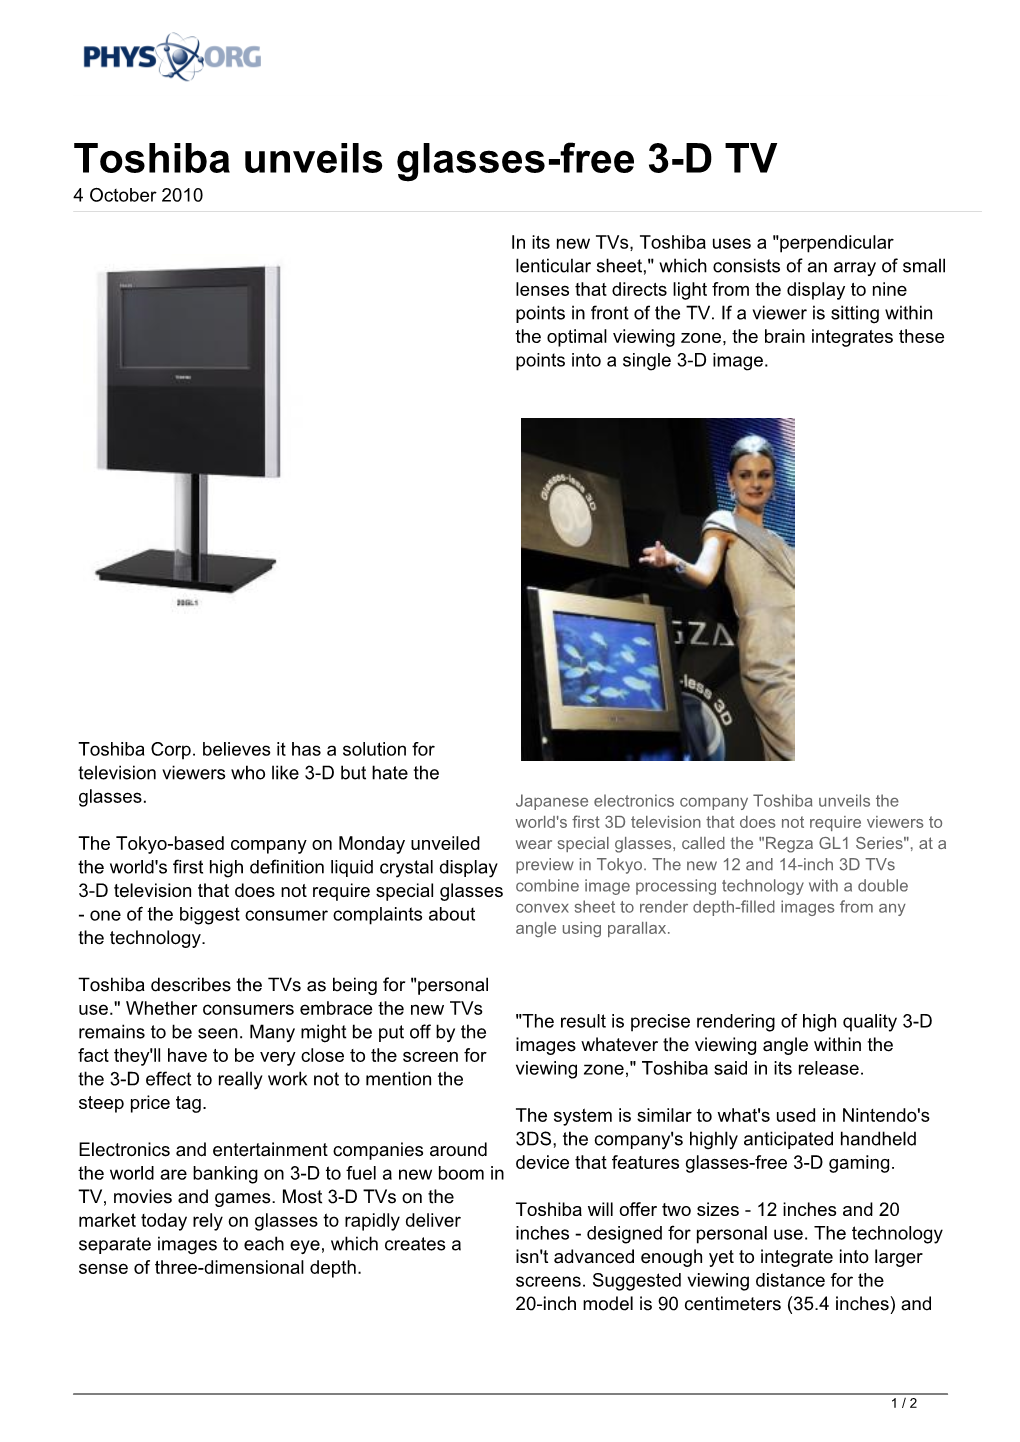 Toshiba Unveils Glasses-Free 3-D TV 4 October 2010